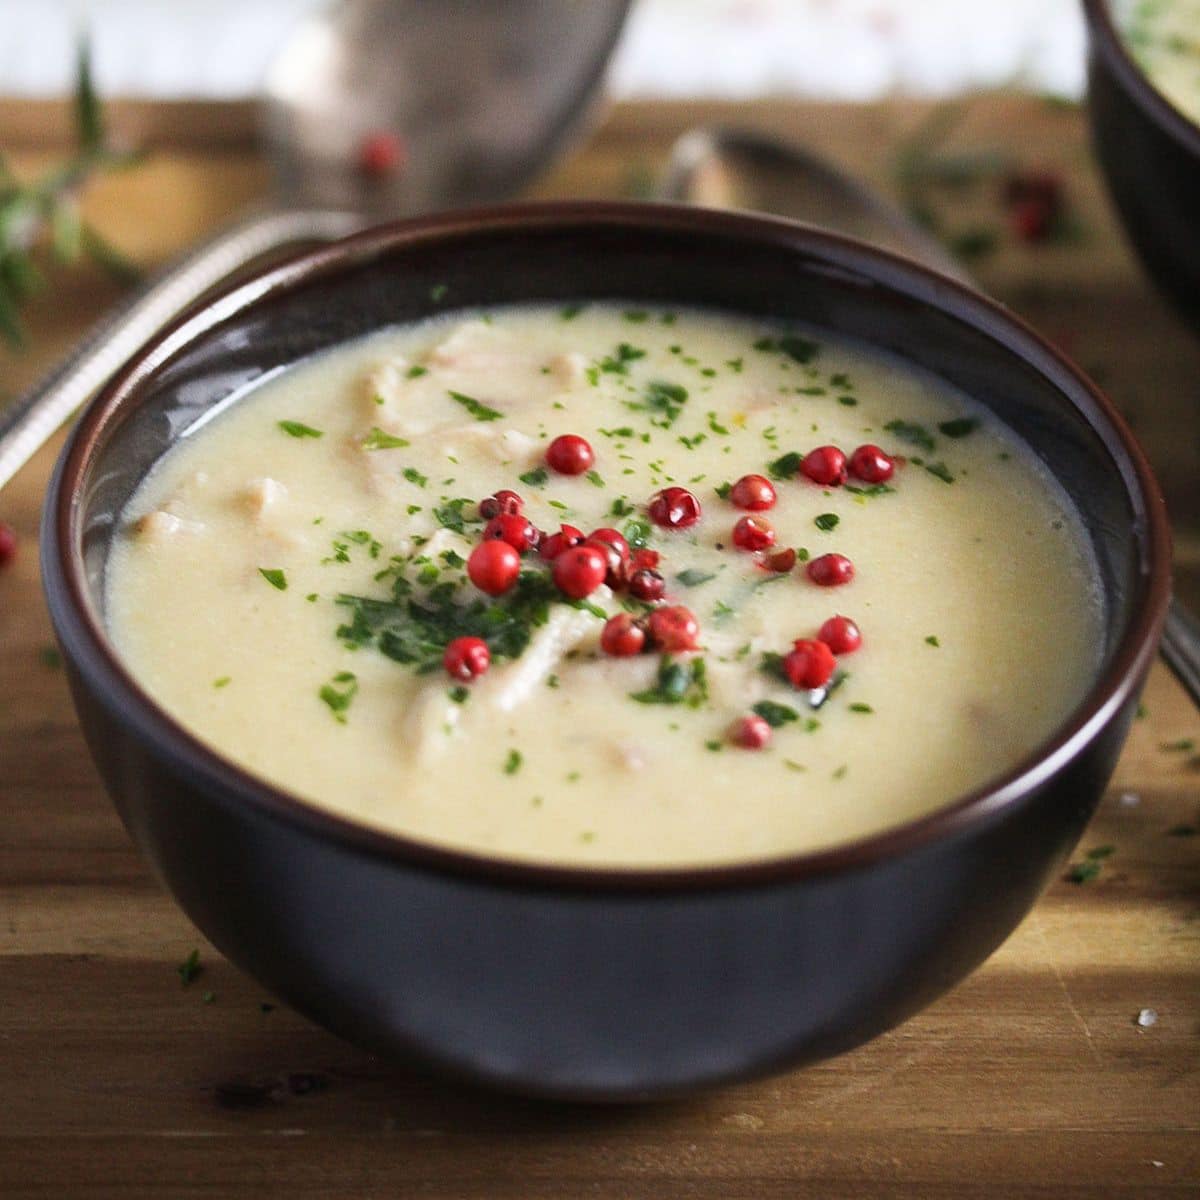 cream of turkey soup garnished with red peppercorns in a small brown bowl.